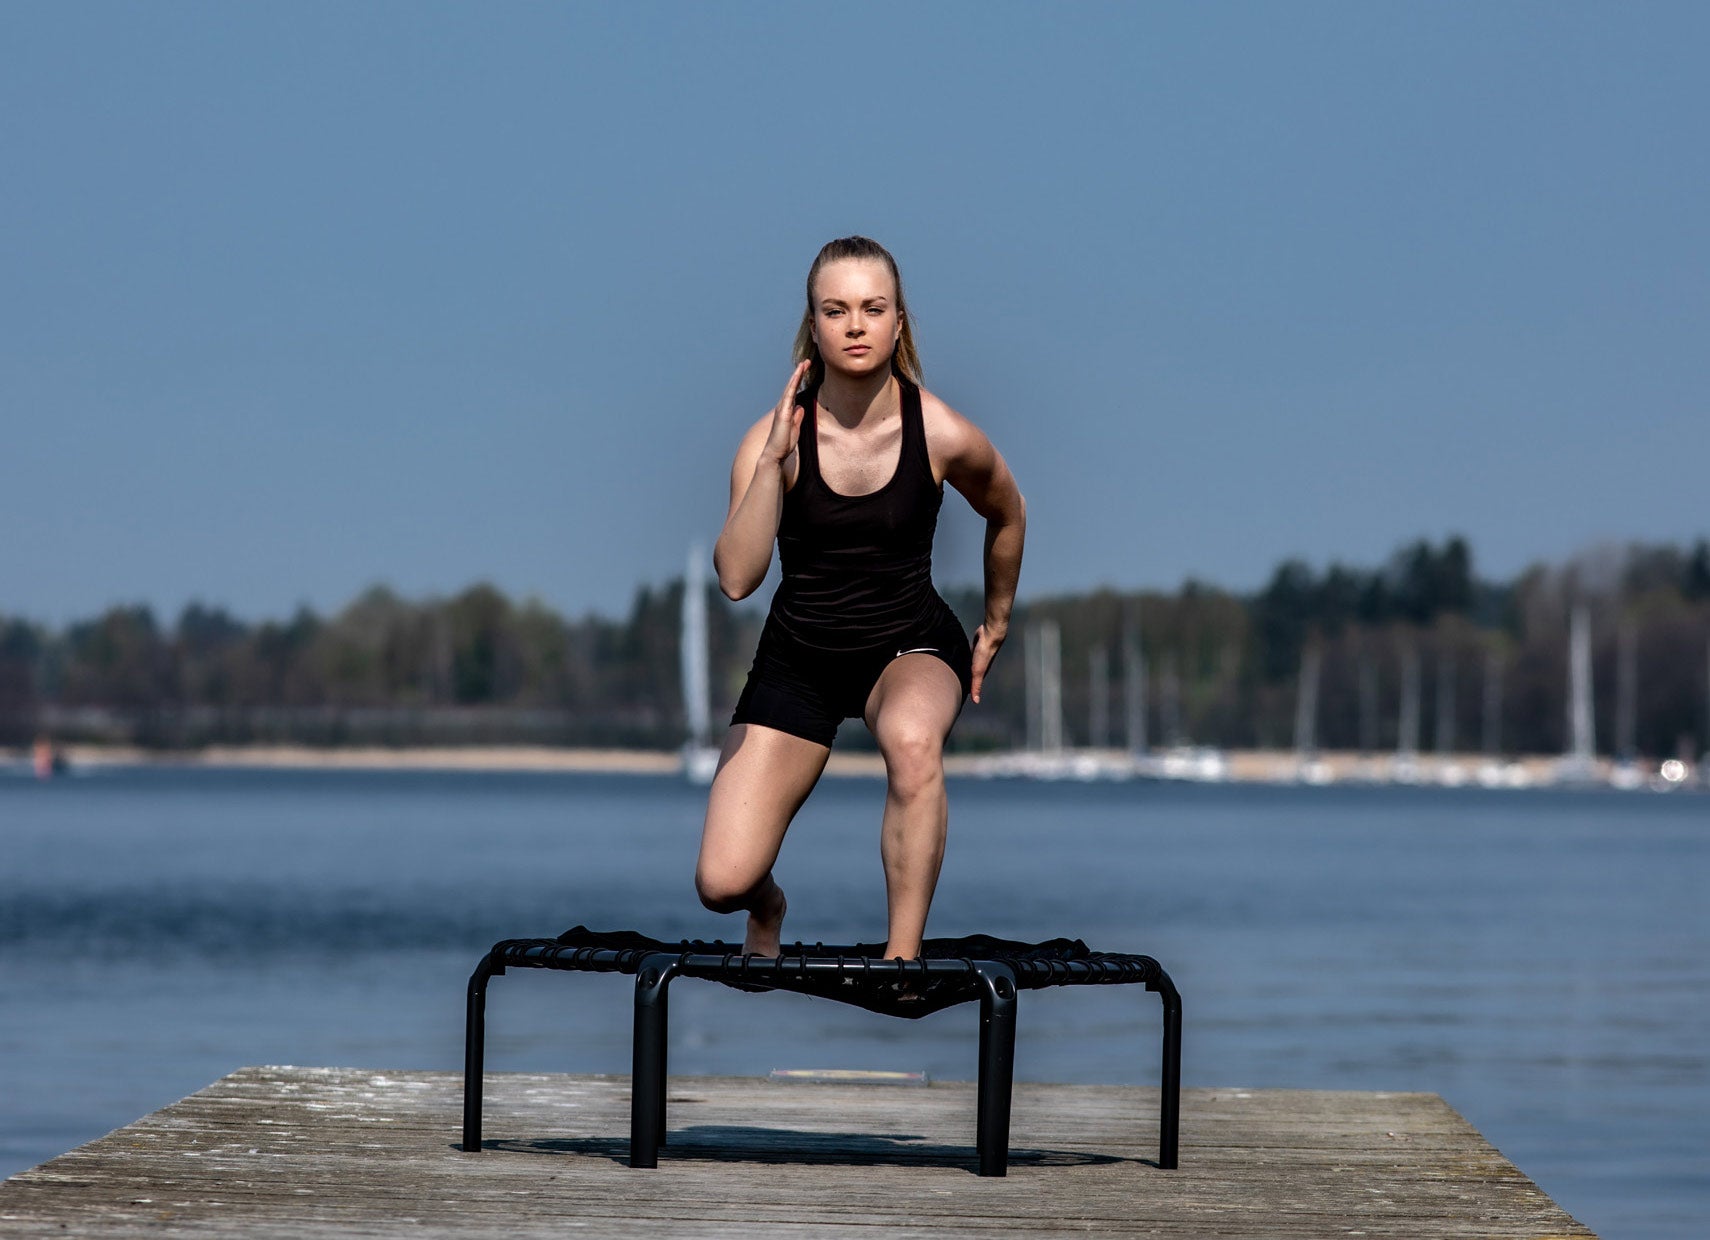 A young woman doing lunges on a black fitness trampoline